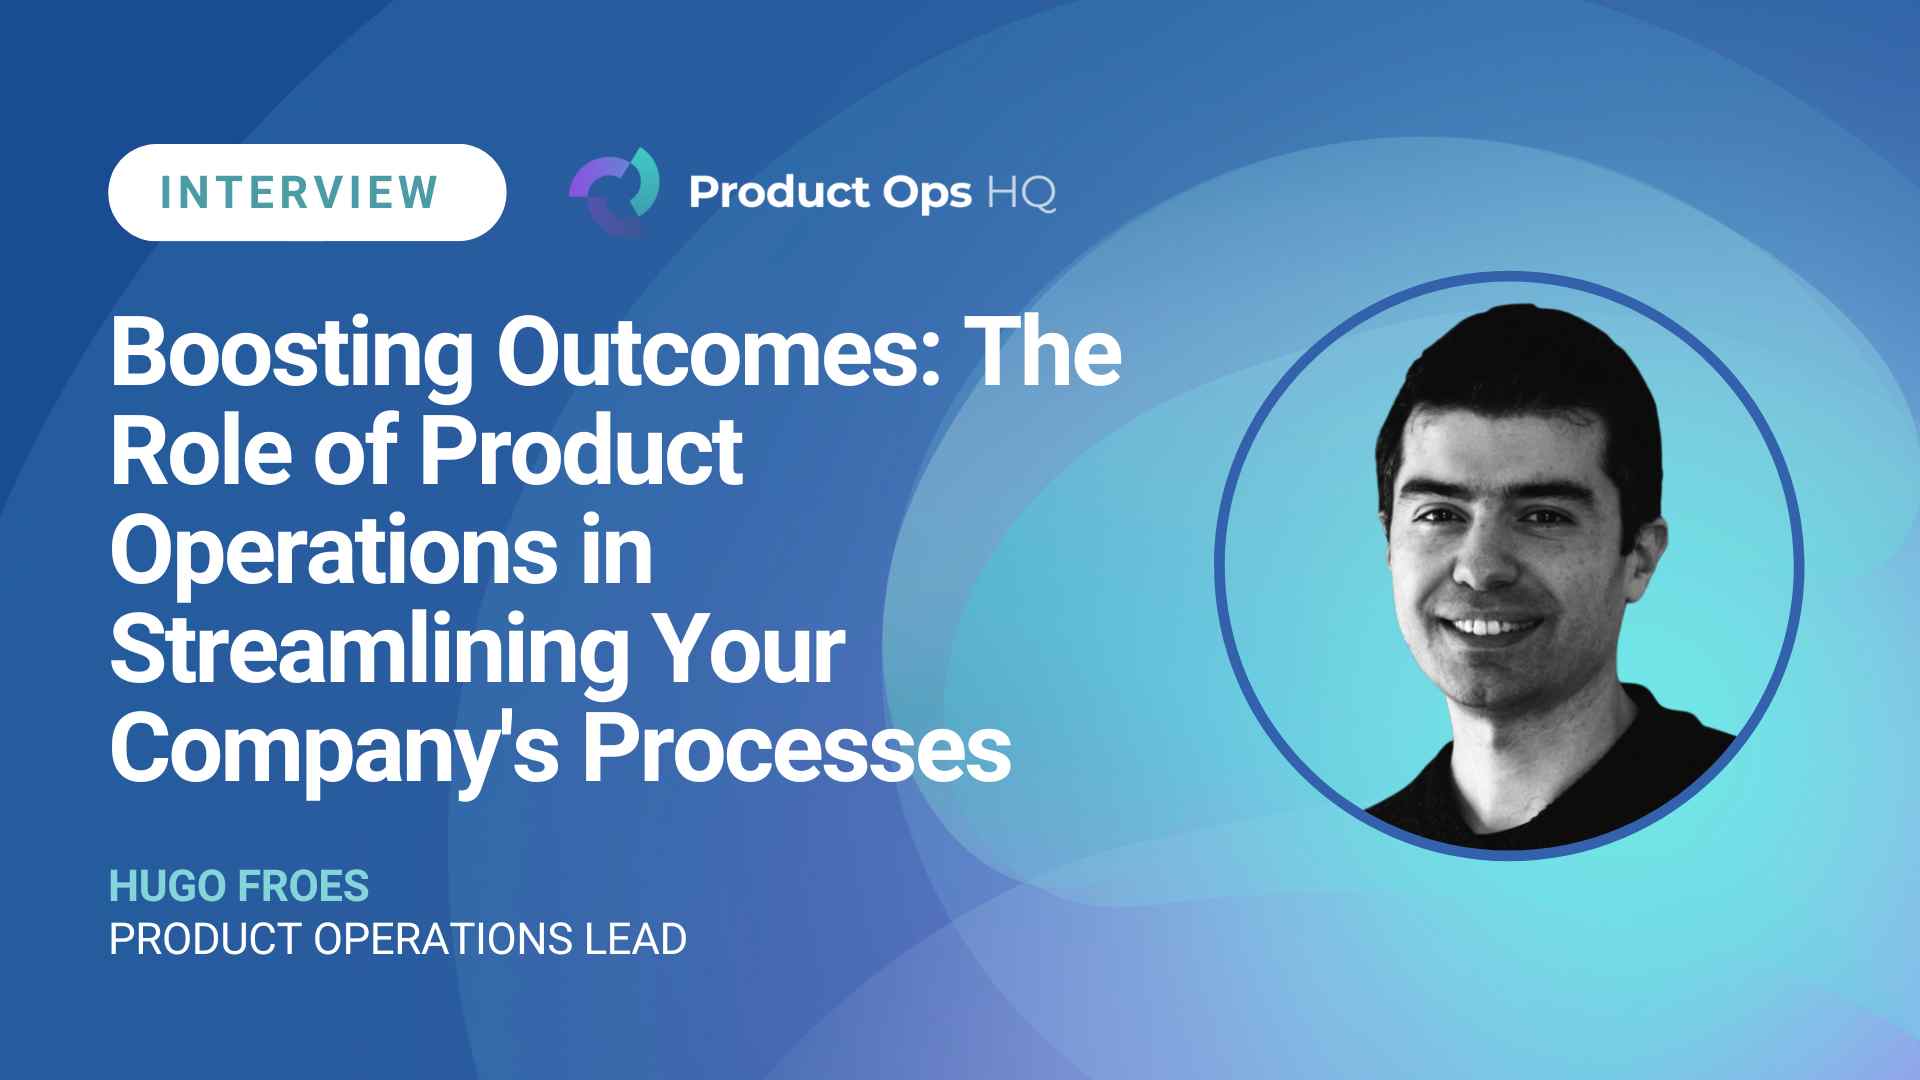 Boosting Outcomes: The Role of Product Operations in Streamlining Your Company's Processes